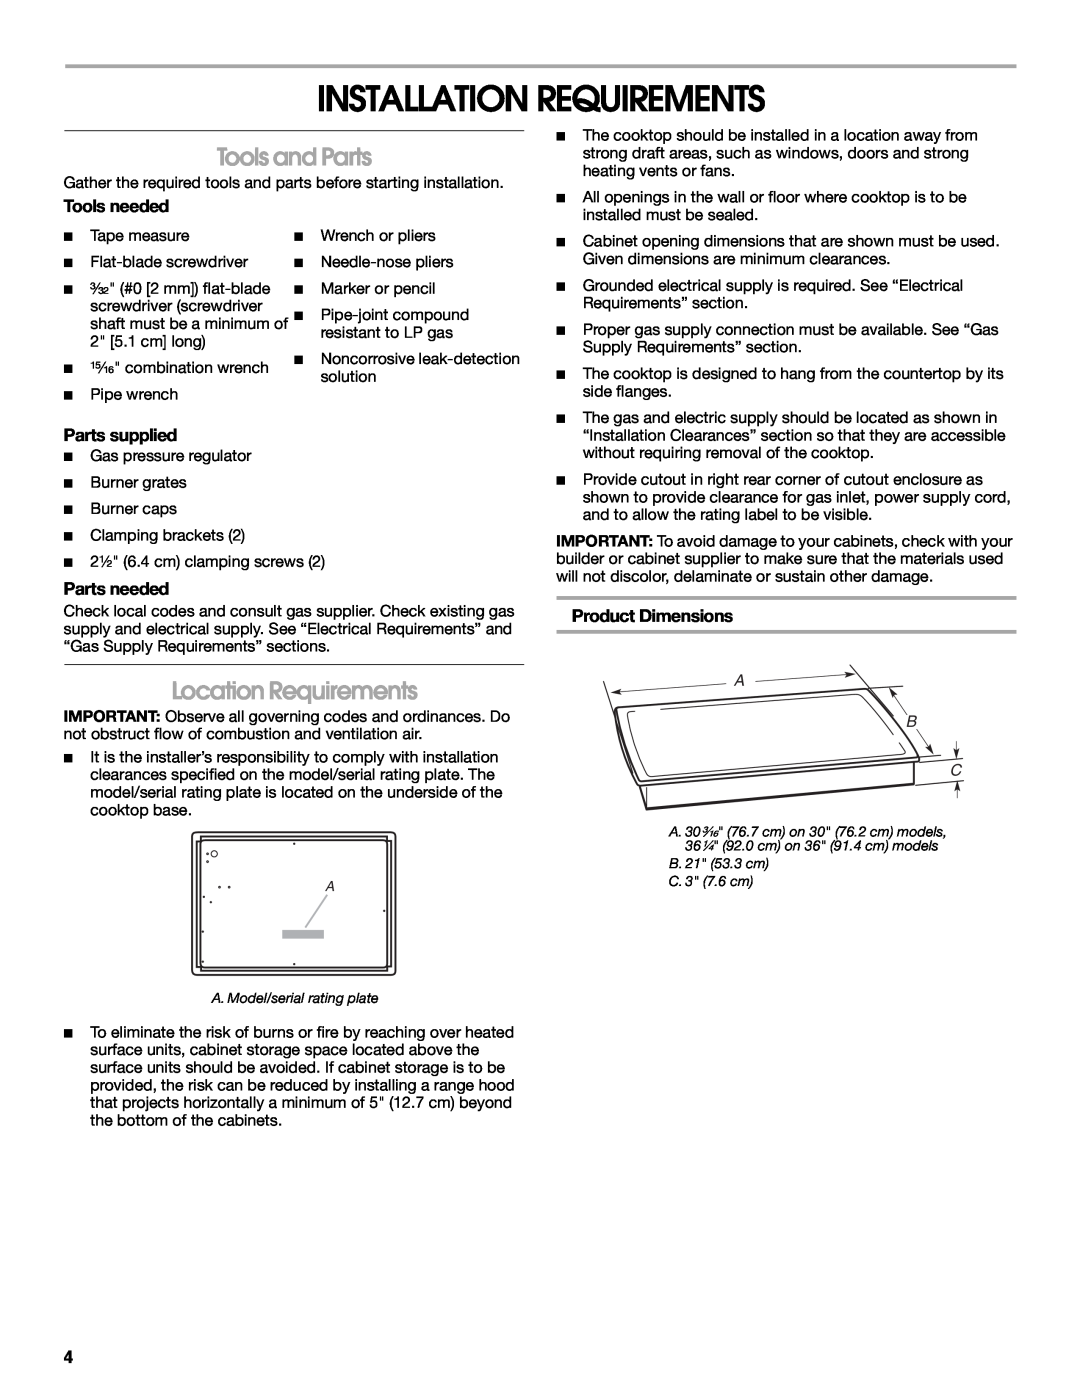 Whirlpool W10526085A Installation Requirements, Tools and Parts, Location Requirements, Tools needed, Parts supplied 